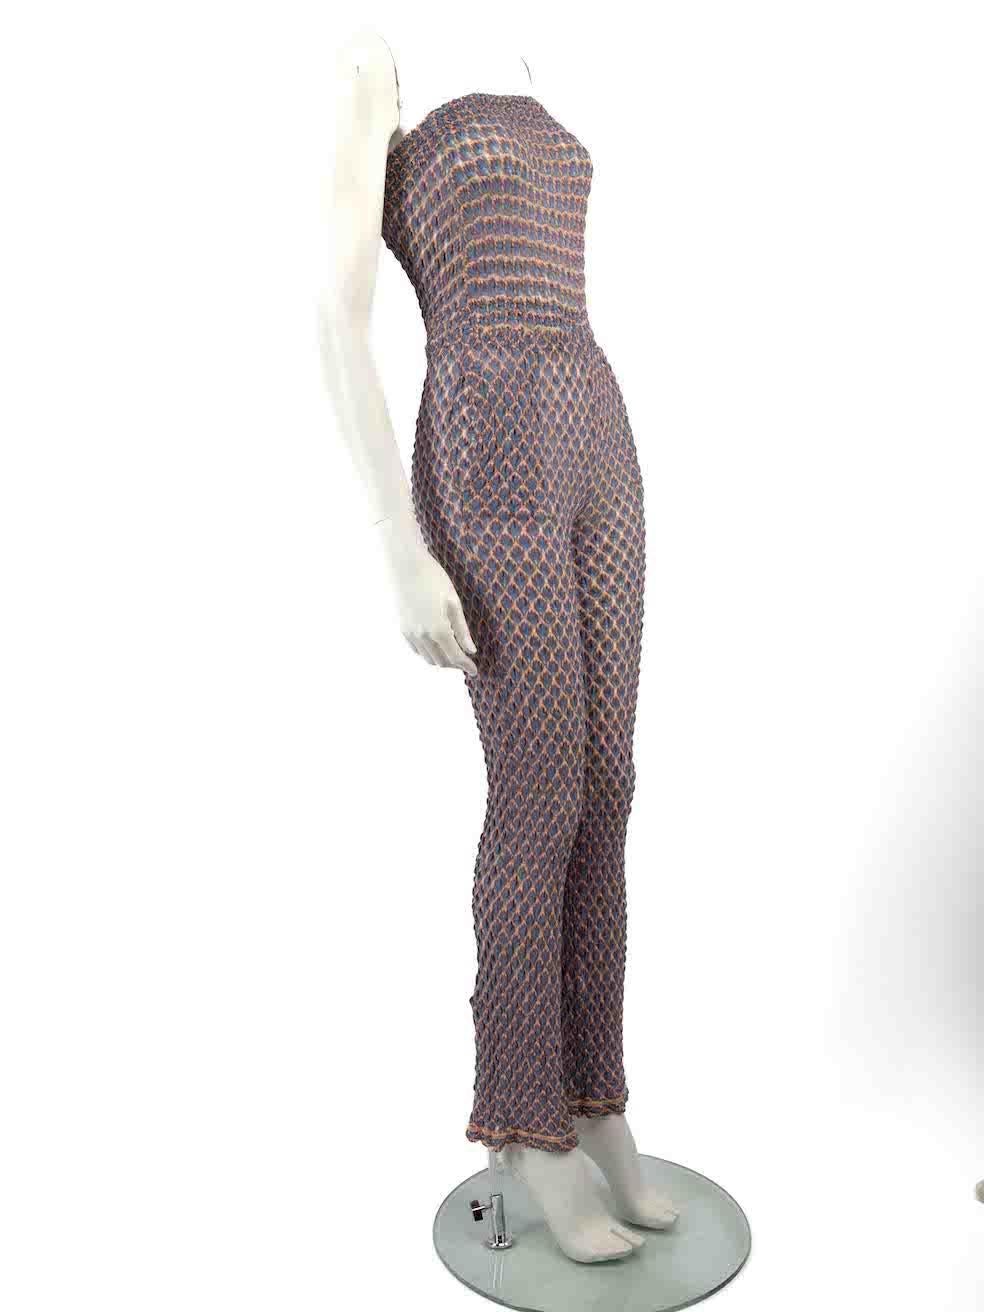 CONDITION is Very good. Hardly any visible wear to jumpsuit is evident on this used Missoni designer resale item.
 
 
 
 Details
 
 
 Blue
 
 Viscose
 
 Knit jumpsuit
 
 Strapless
 
 Elasticated band
 
 2x Side pockets
 
 Straight leg
 
 
 
 
 
